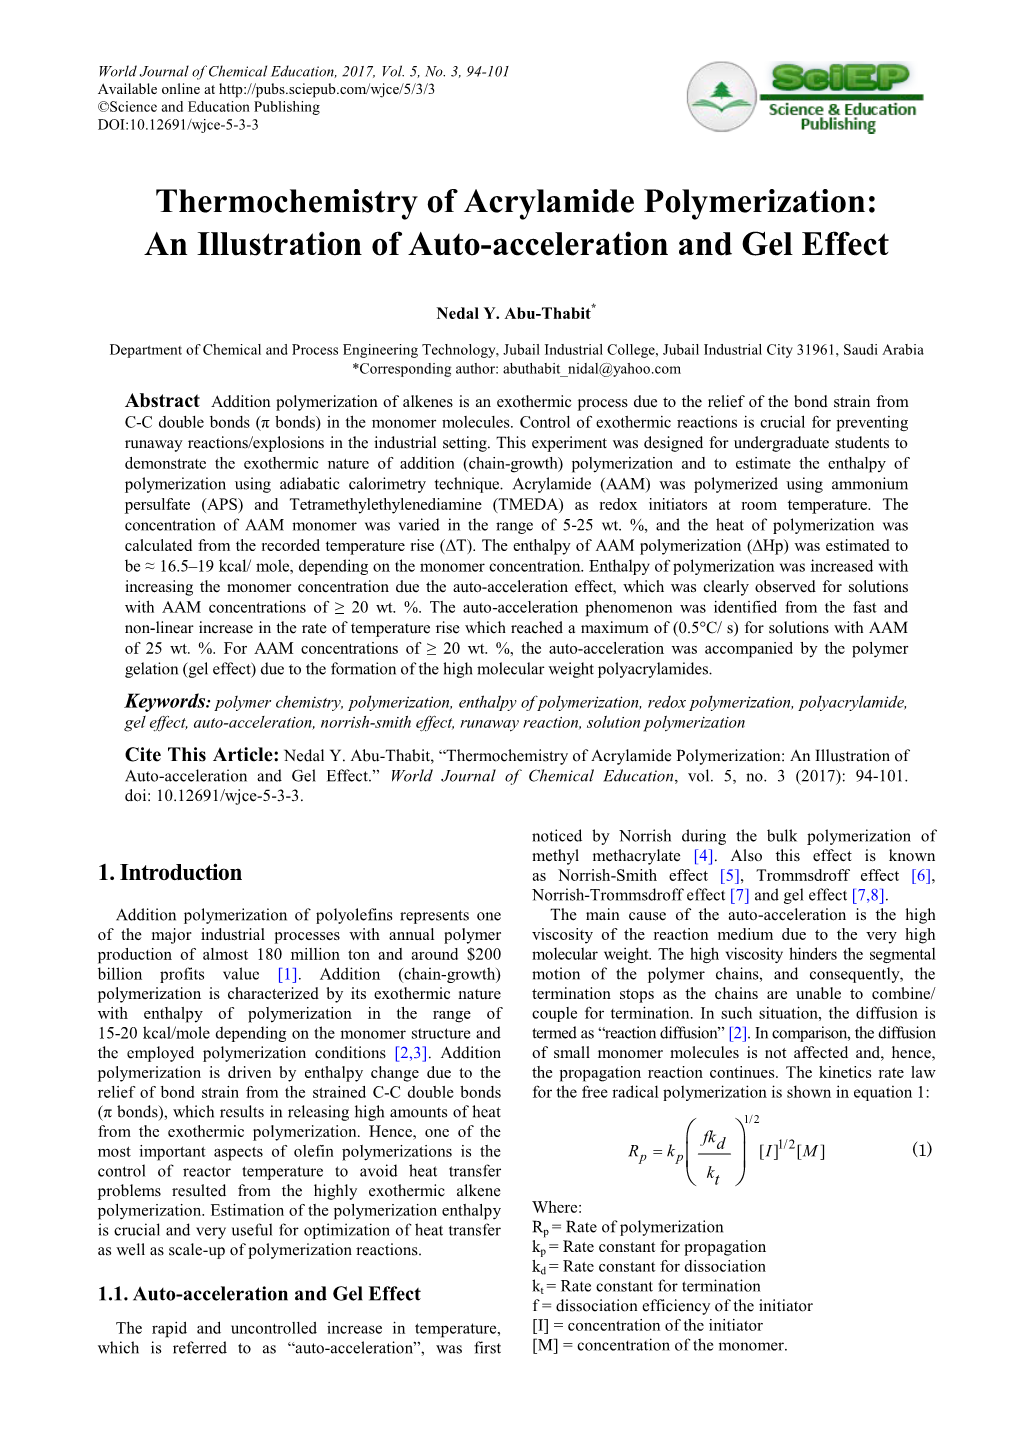 Thermochemistry of Acrylamide Polymerization: an Illustration of Auto-Acceleration and Gel Effect